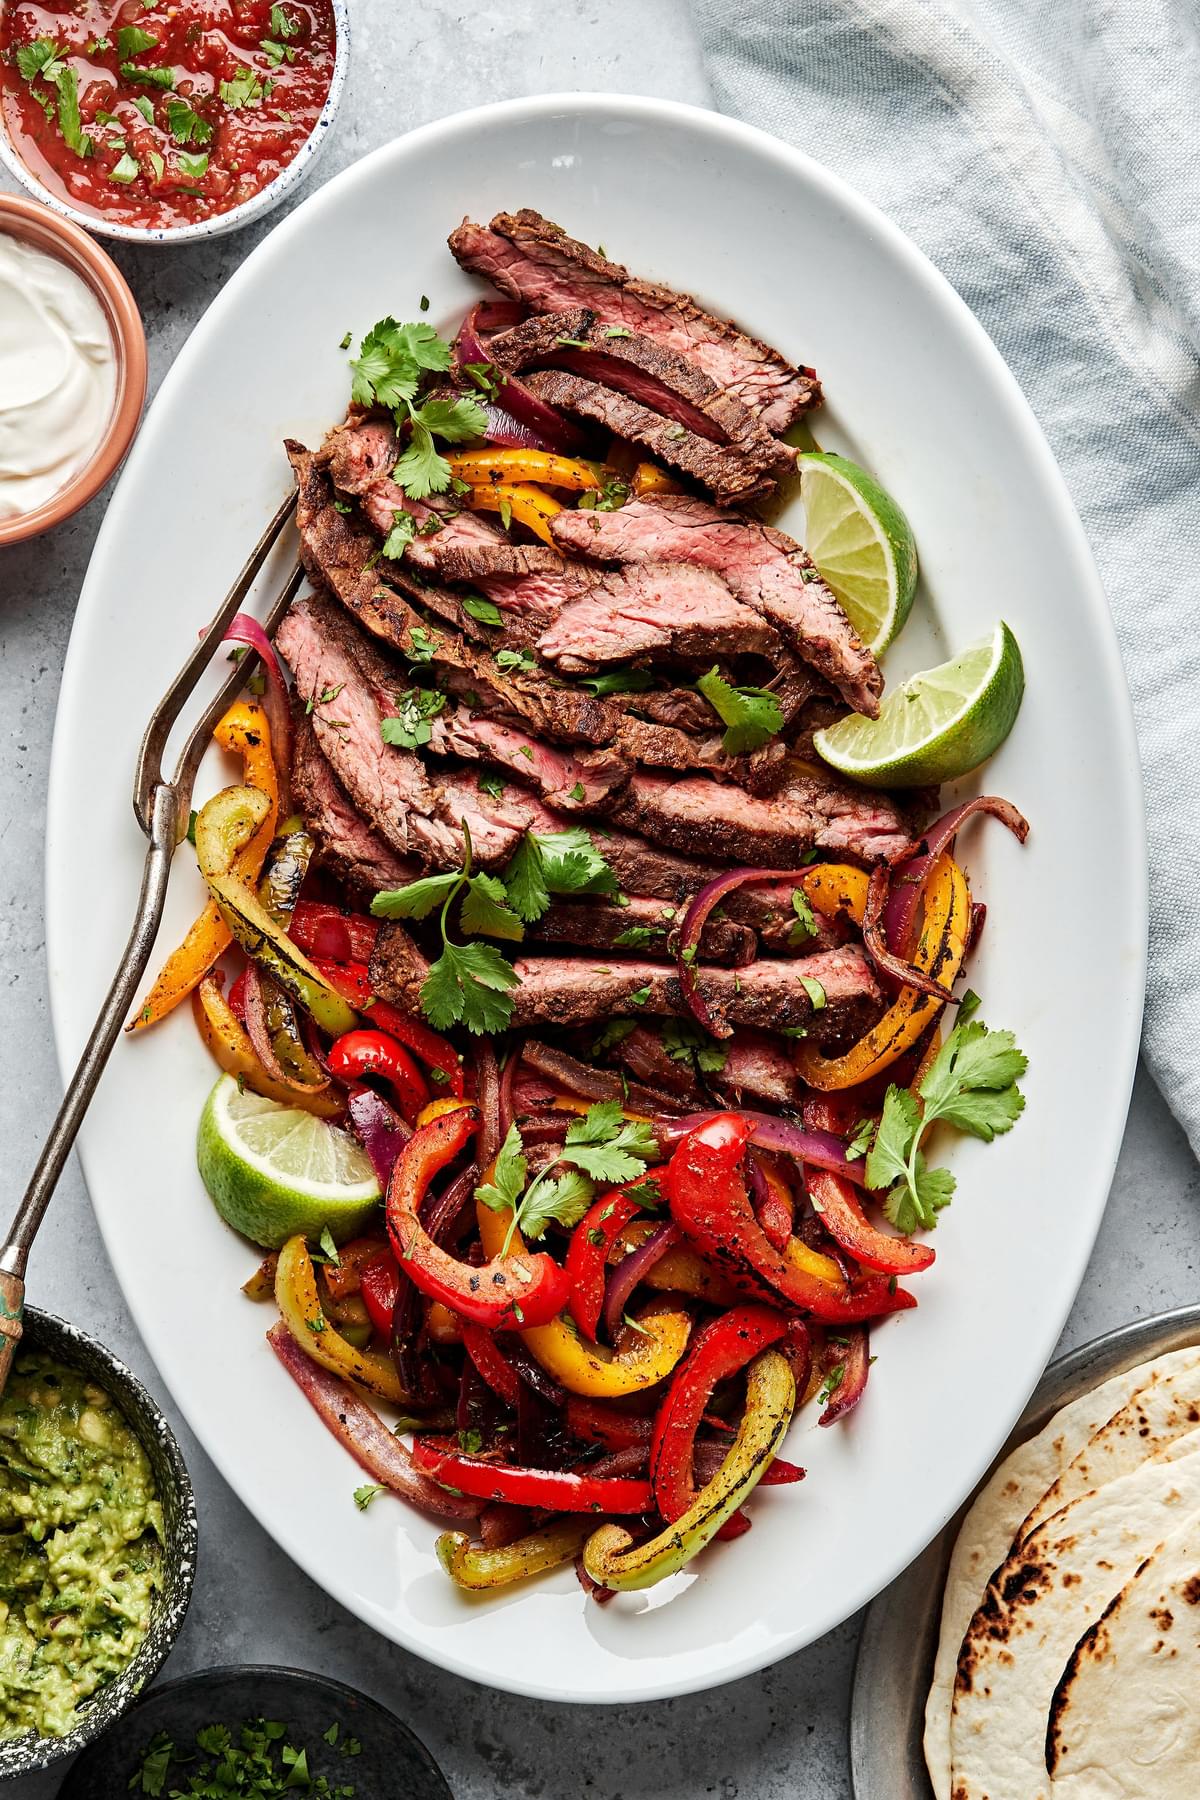 steak fajitas on a serving plate sprinkled with cilantro surrounded by salsa, guacamole, sour cream and corn tortillas